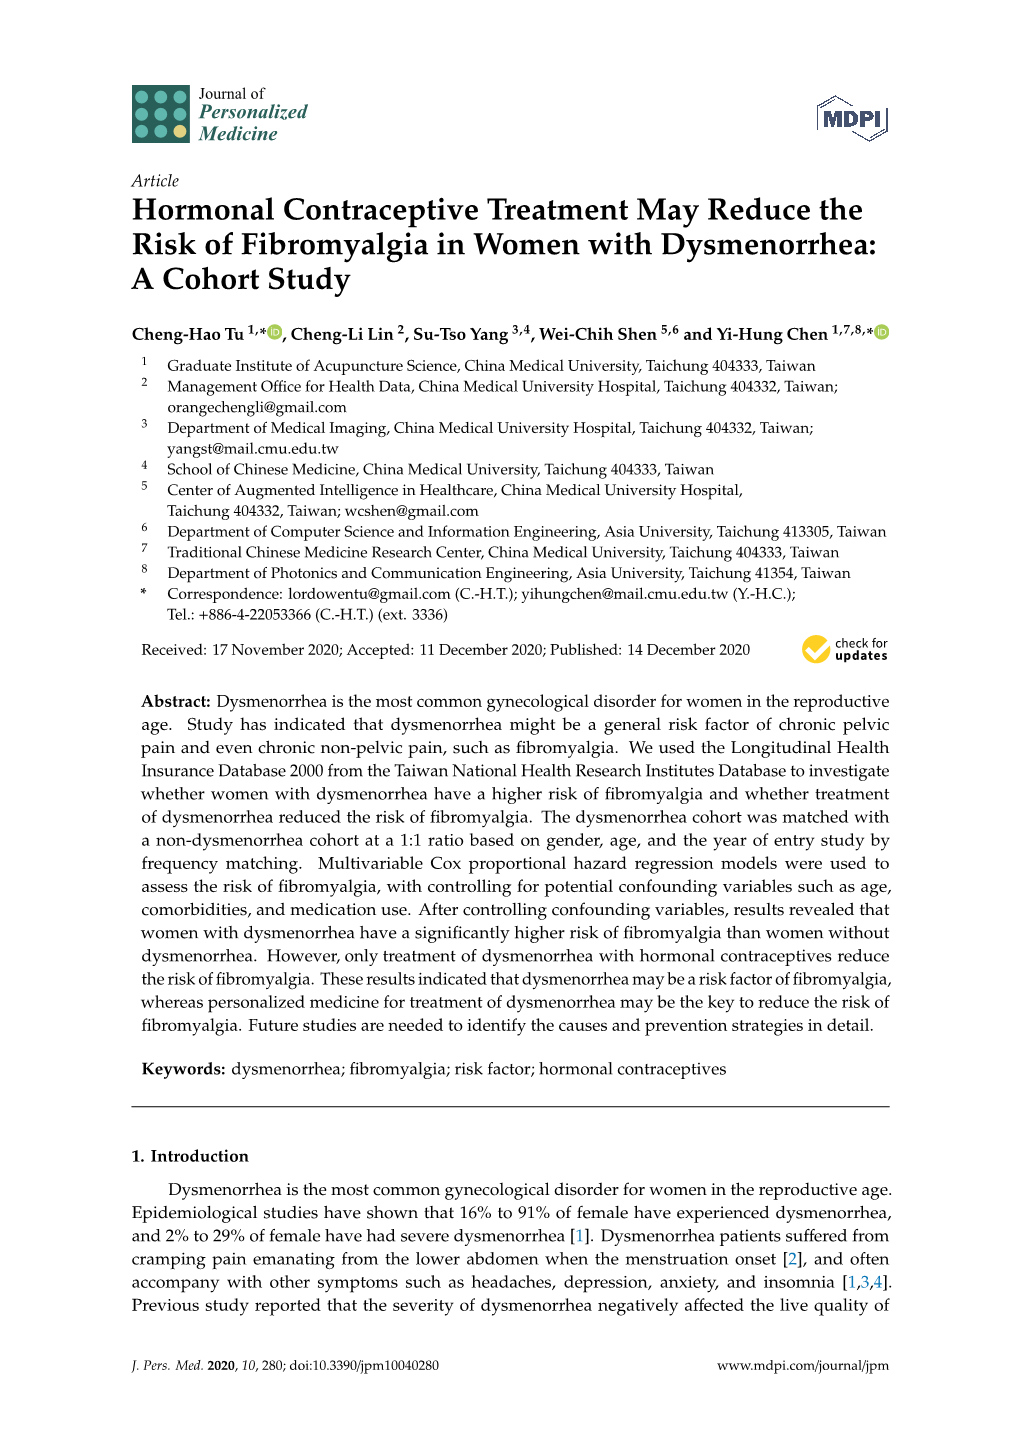 Hormonal Contraceptive Treatment May Reduce the Risk of Fibromyalgia in Women with Dysmenorrhea: a Cohort Study